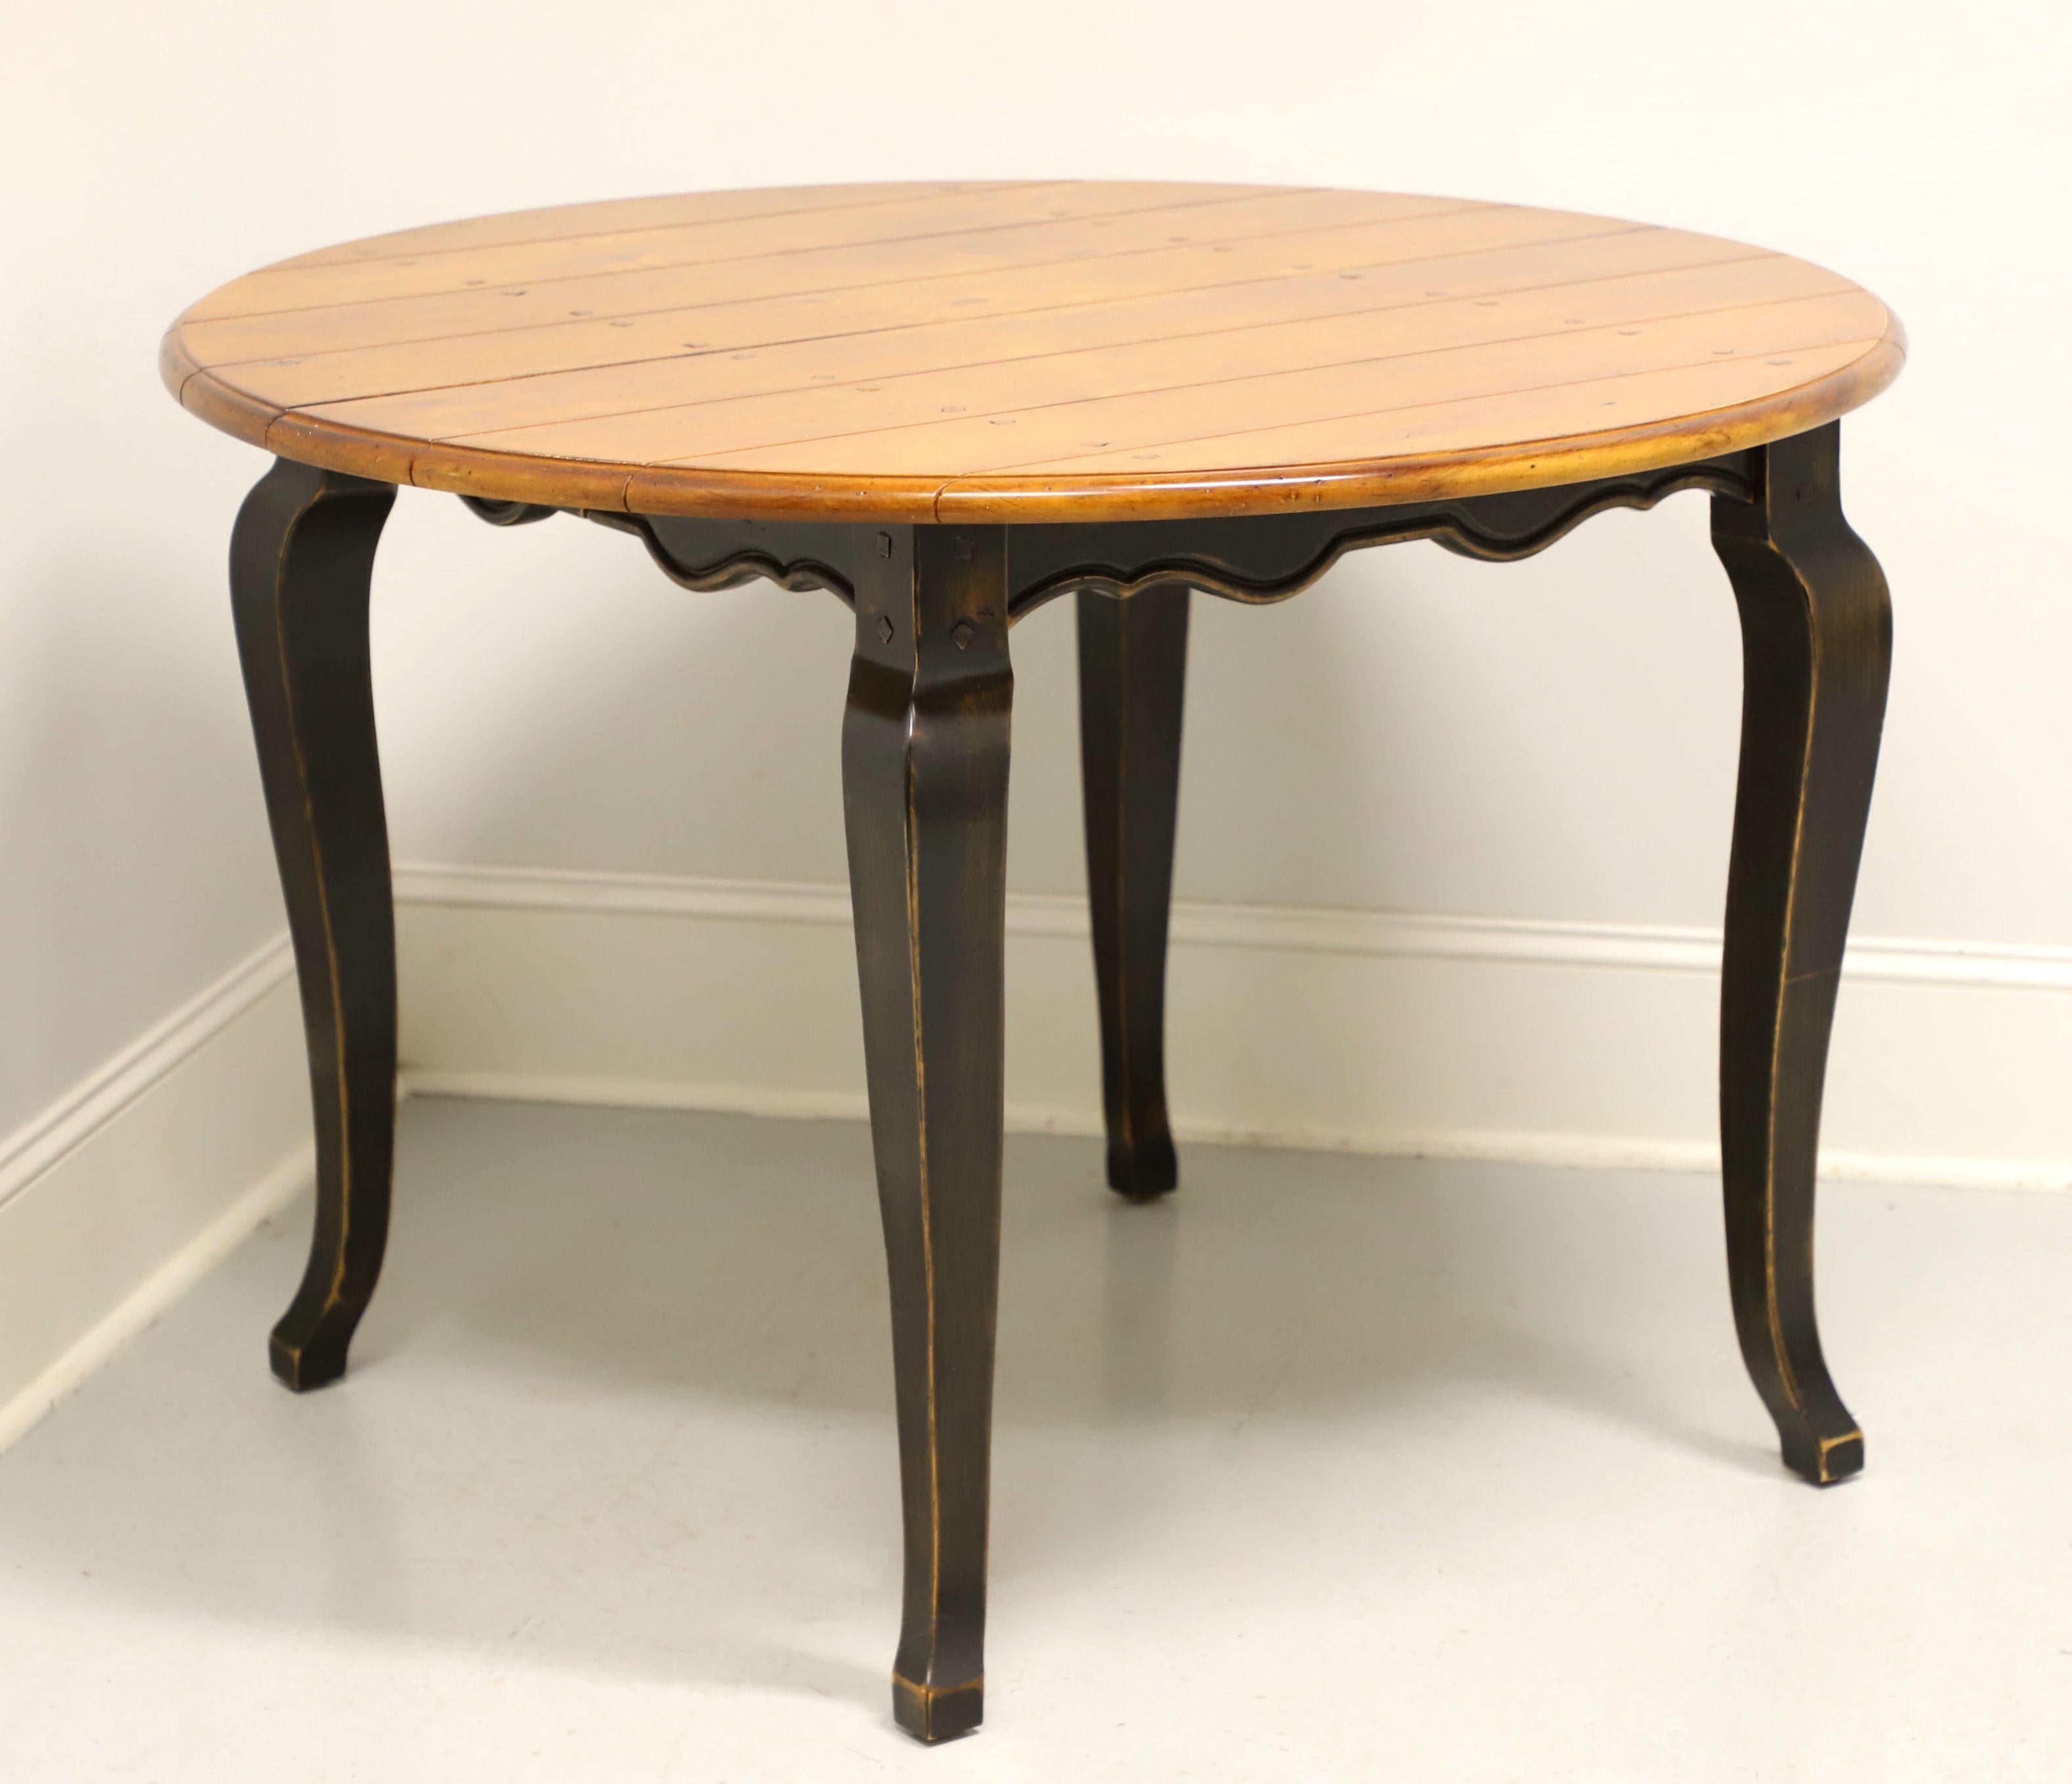 A dining table in the French Country style by Lorts Furniture. Pine with natural plank style top, black painted scalloped skirt and cabriole legs. Expandable on wood expansion sliders and includes one extension leaf. Made in Goodyear, Arizona, USA,